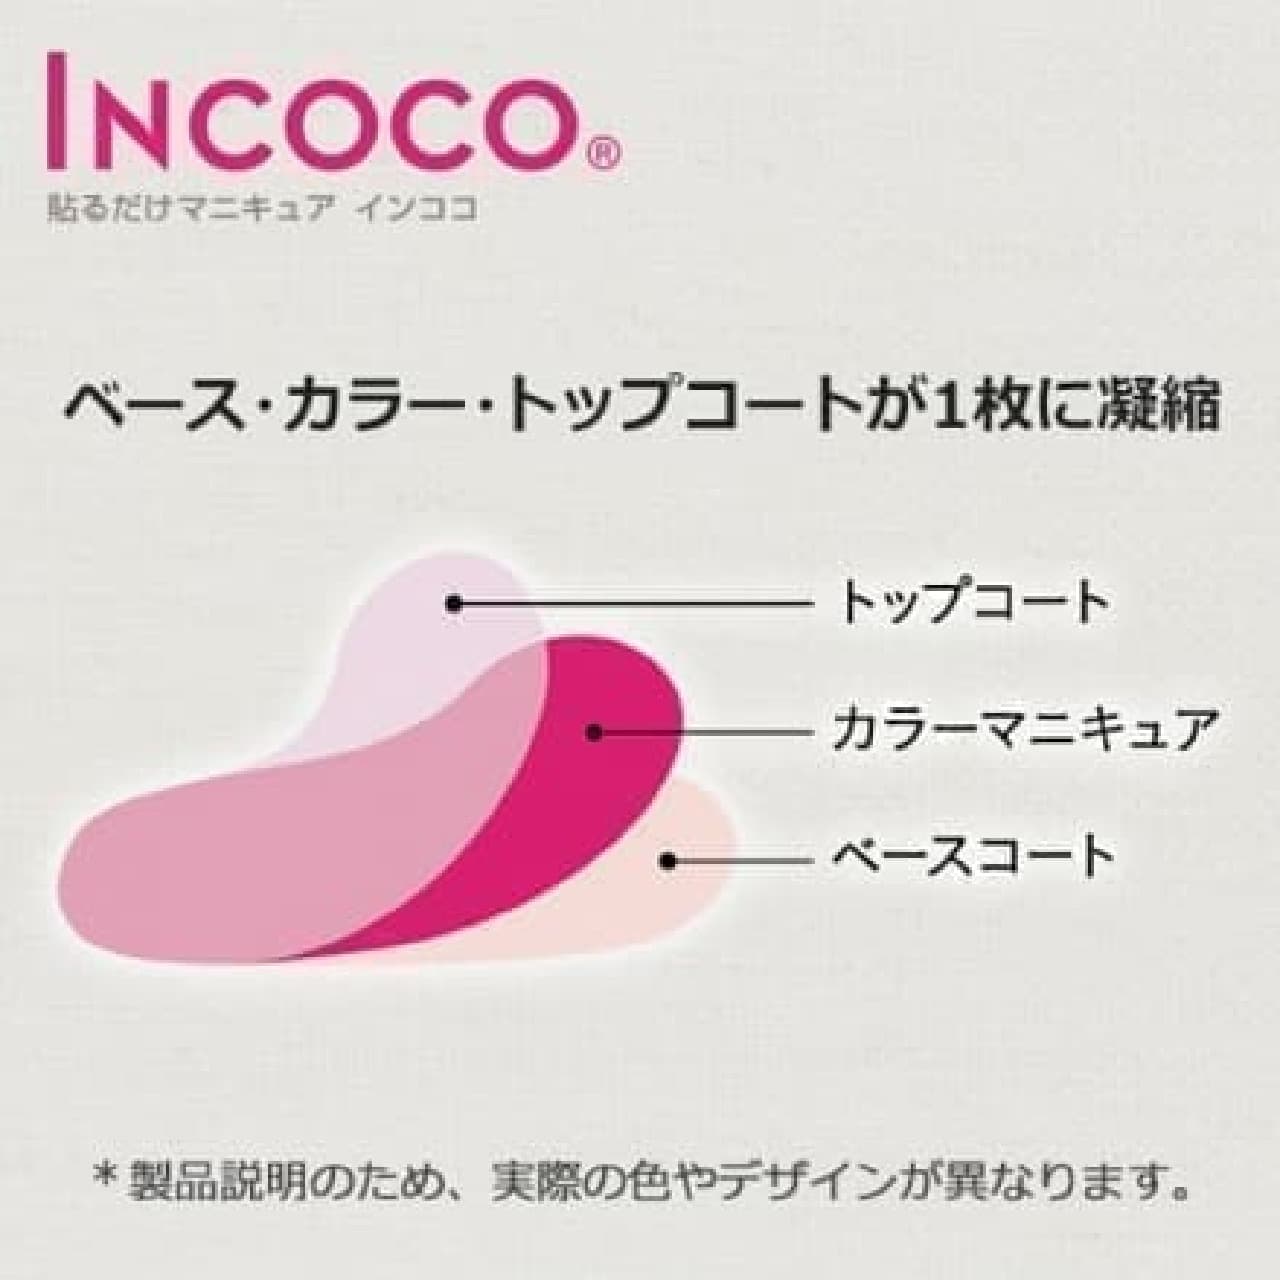 Manicure "Incoco" just by pasting